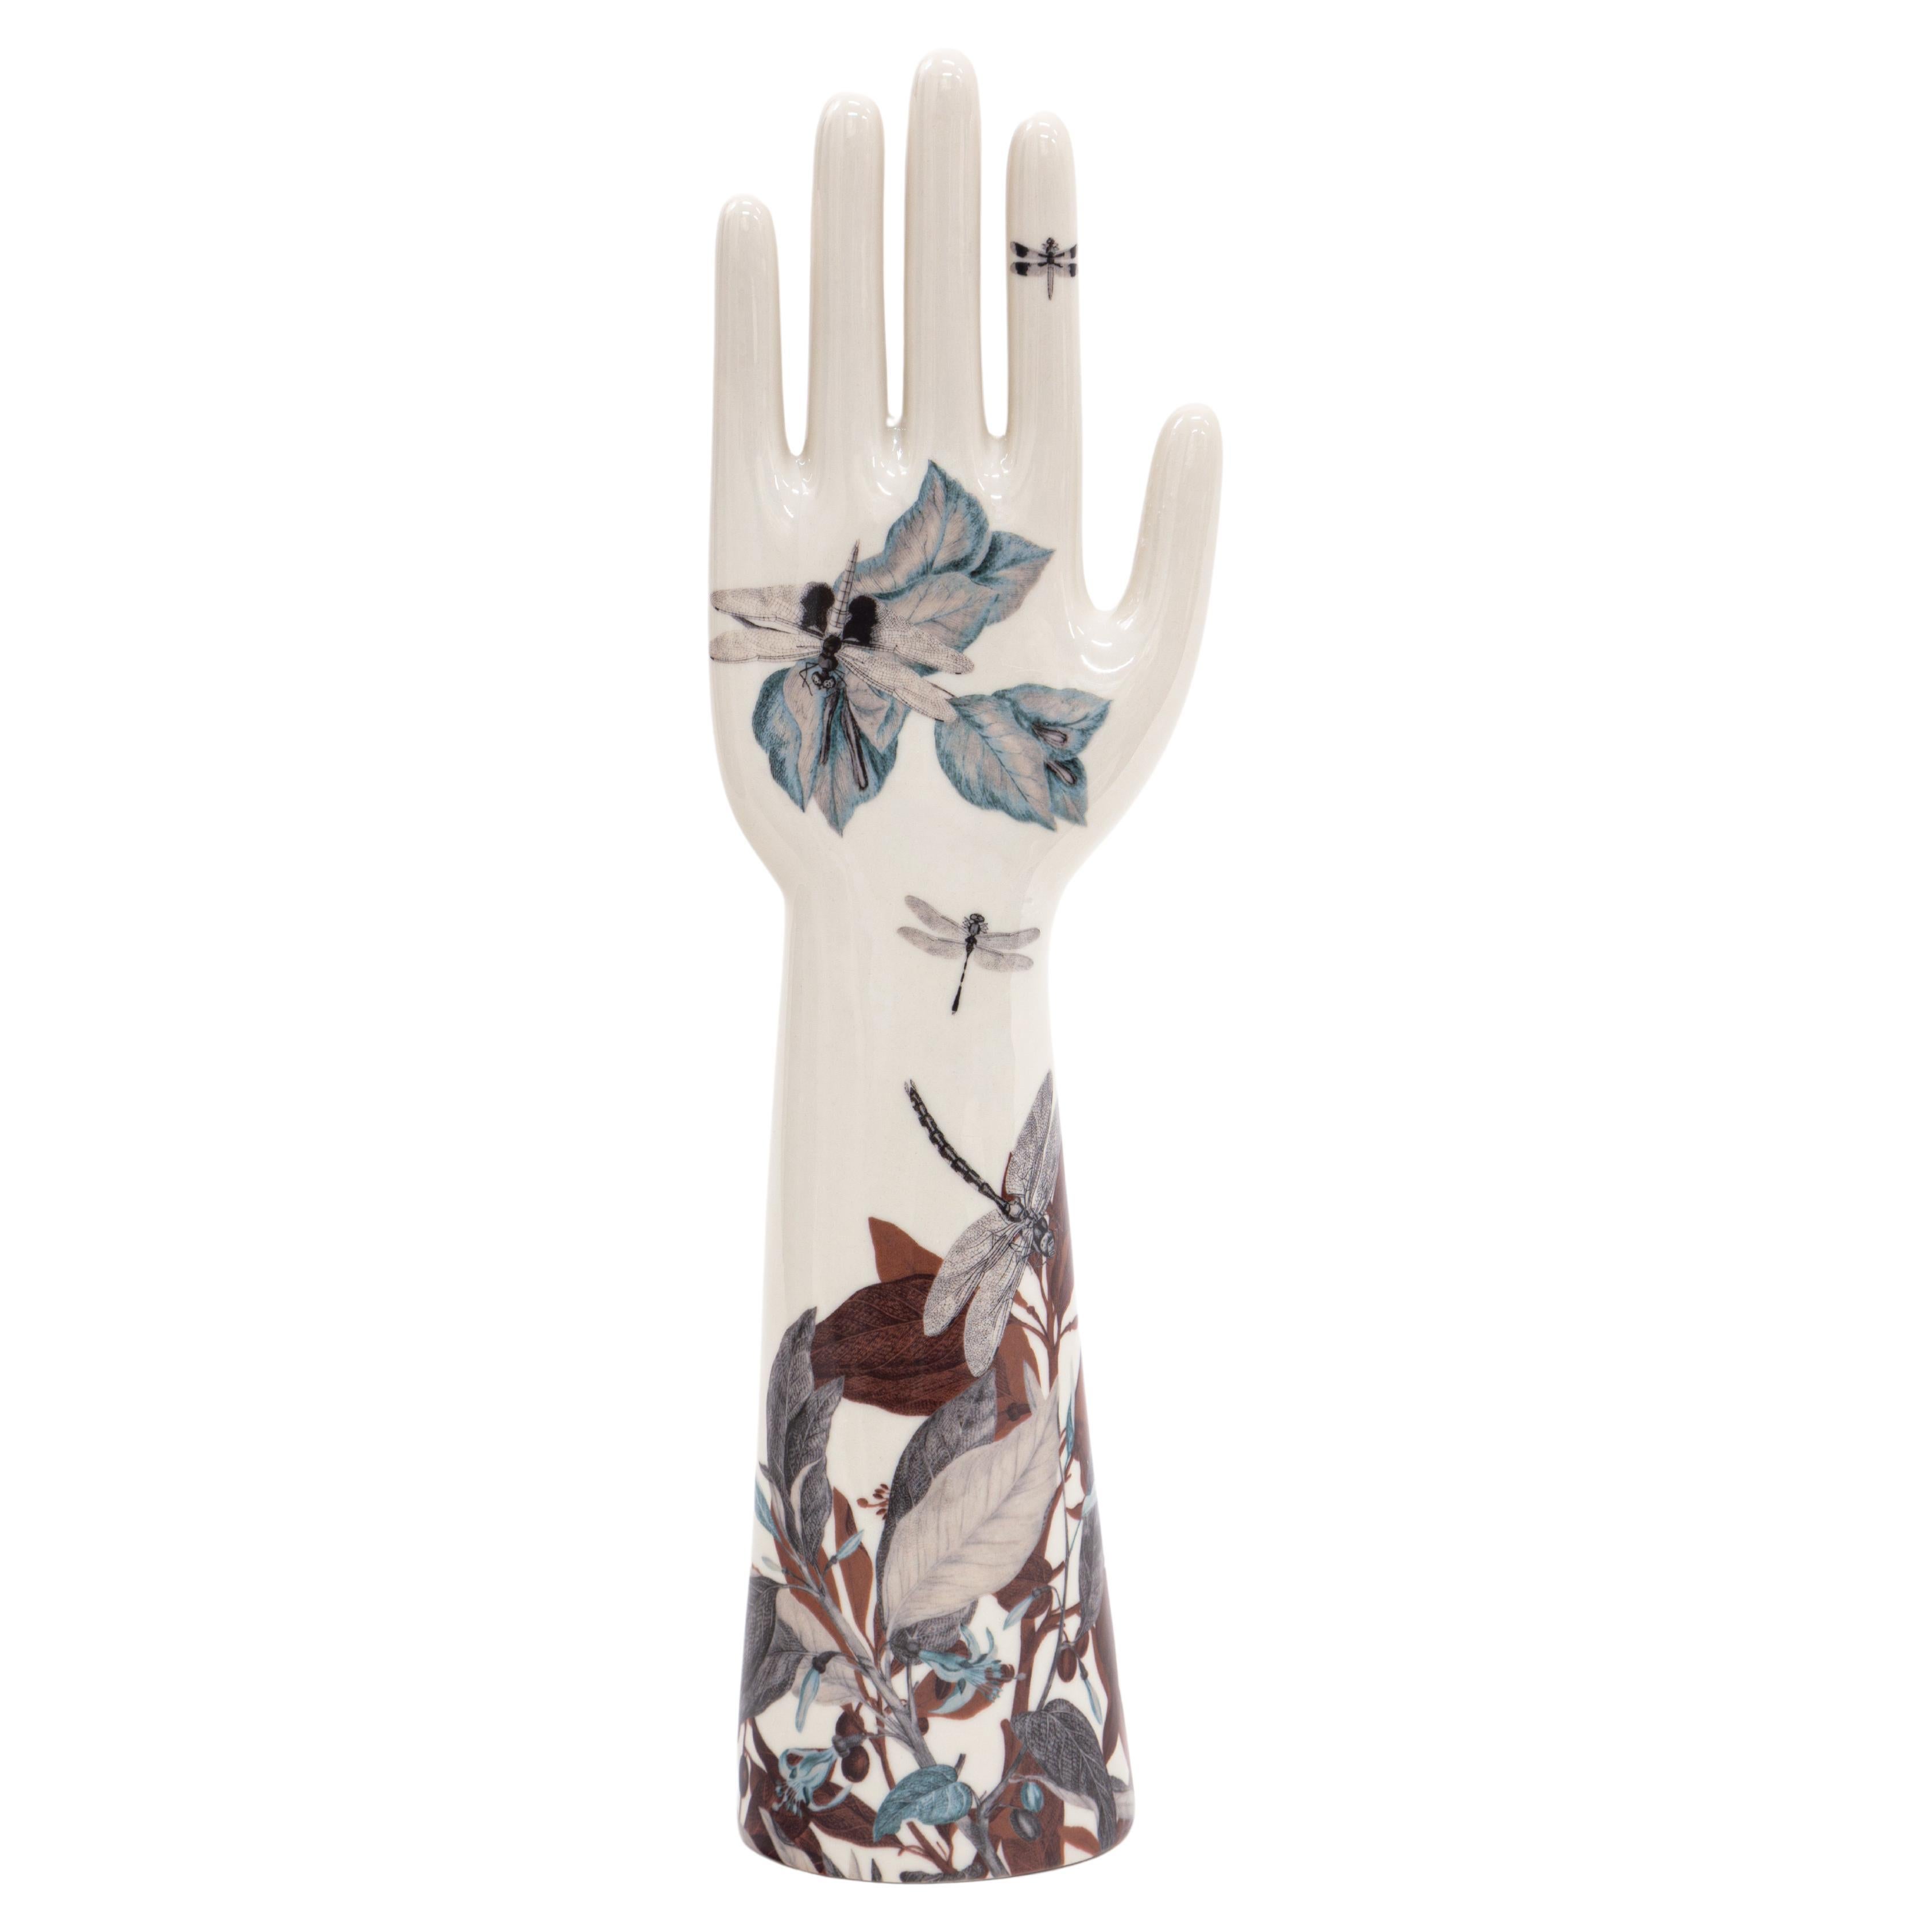 Anatomica, Porcelain Hand with leaves and dragonflies Decoration by Vito Nesta